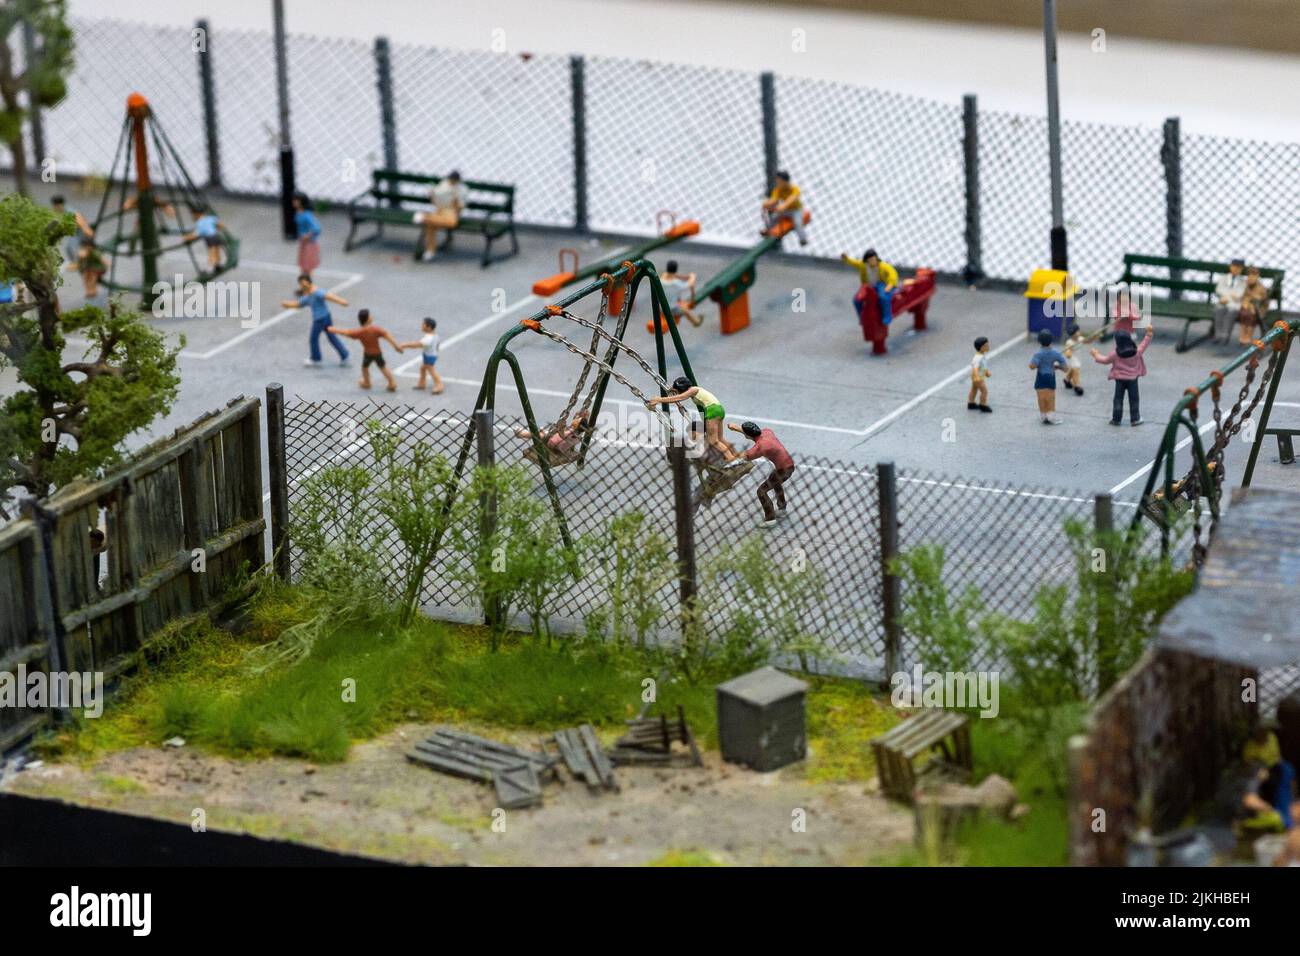 An exhibition of a mini toy design of children playing in a playground Stock Photo